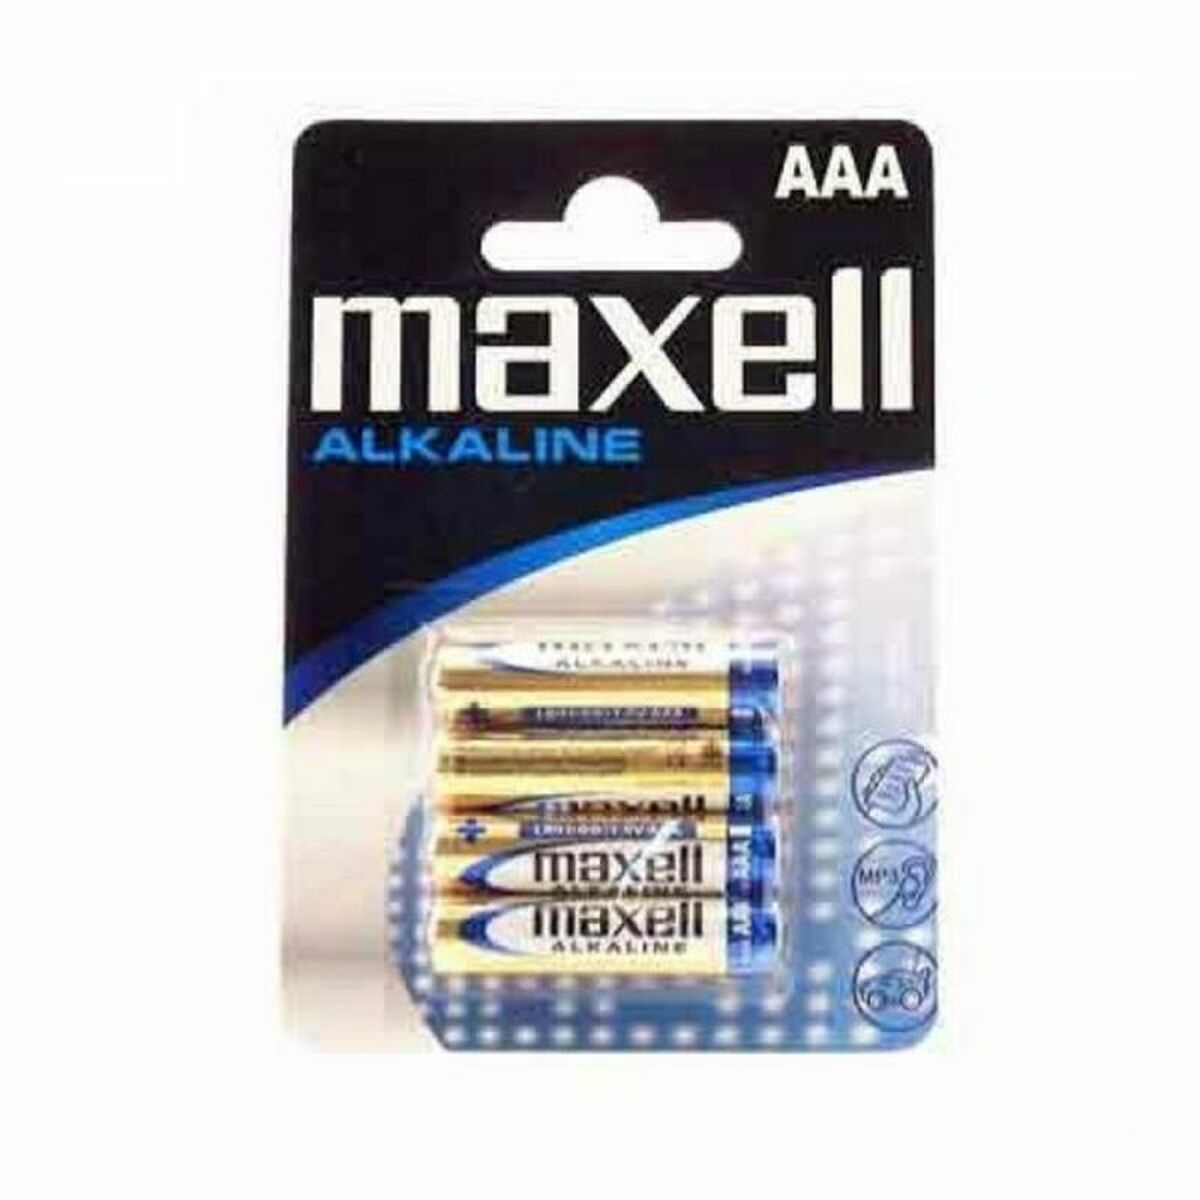 Duracell Pilas Alcalinas AAA Paquete 4 + 2 unid 